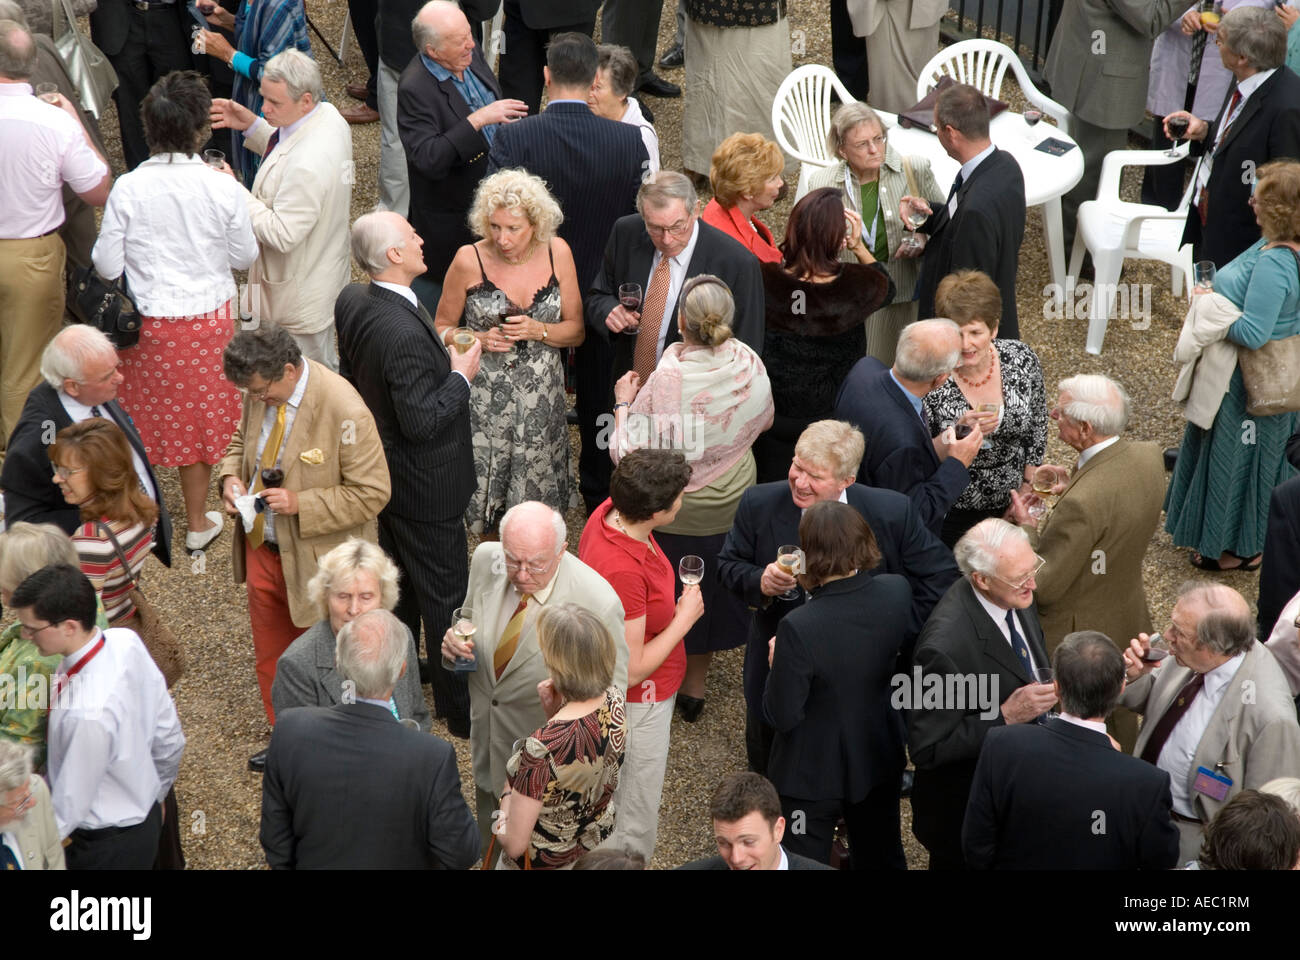 English people drinking and socialising at society event London England UK Stock Photo